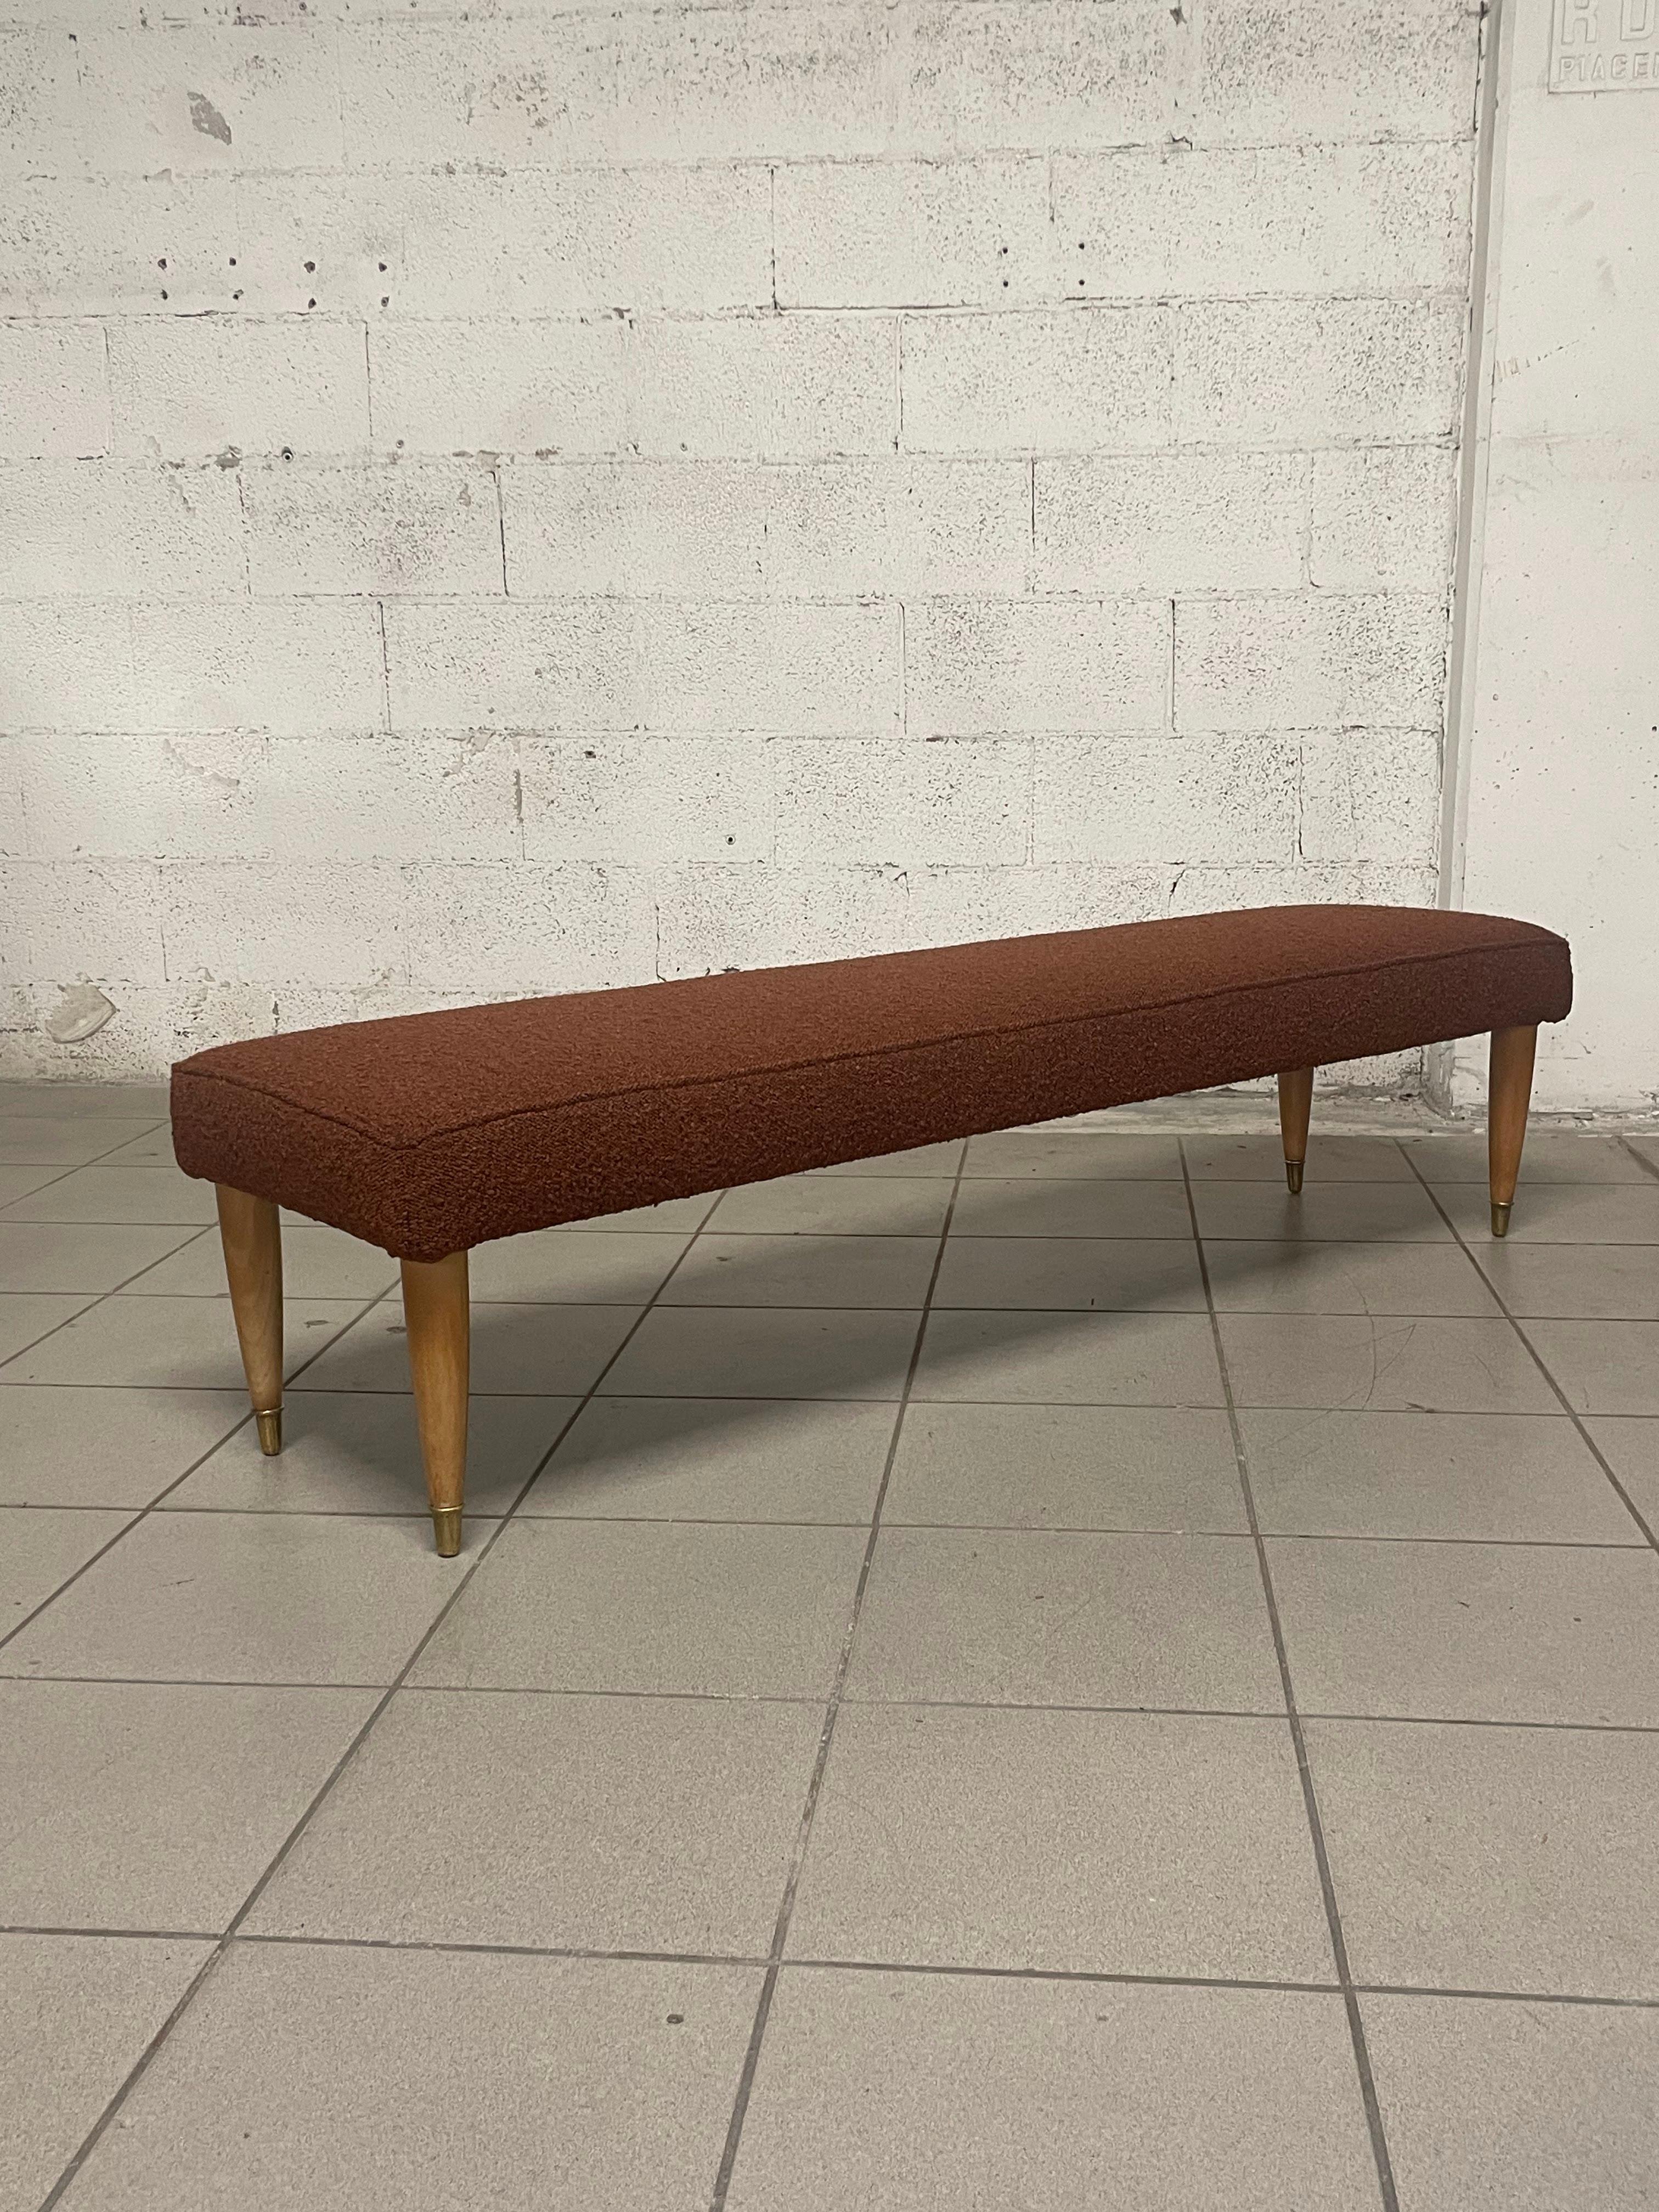 1950s bench made of maple wood and new upholstery For Sale 2